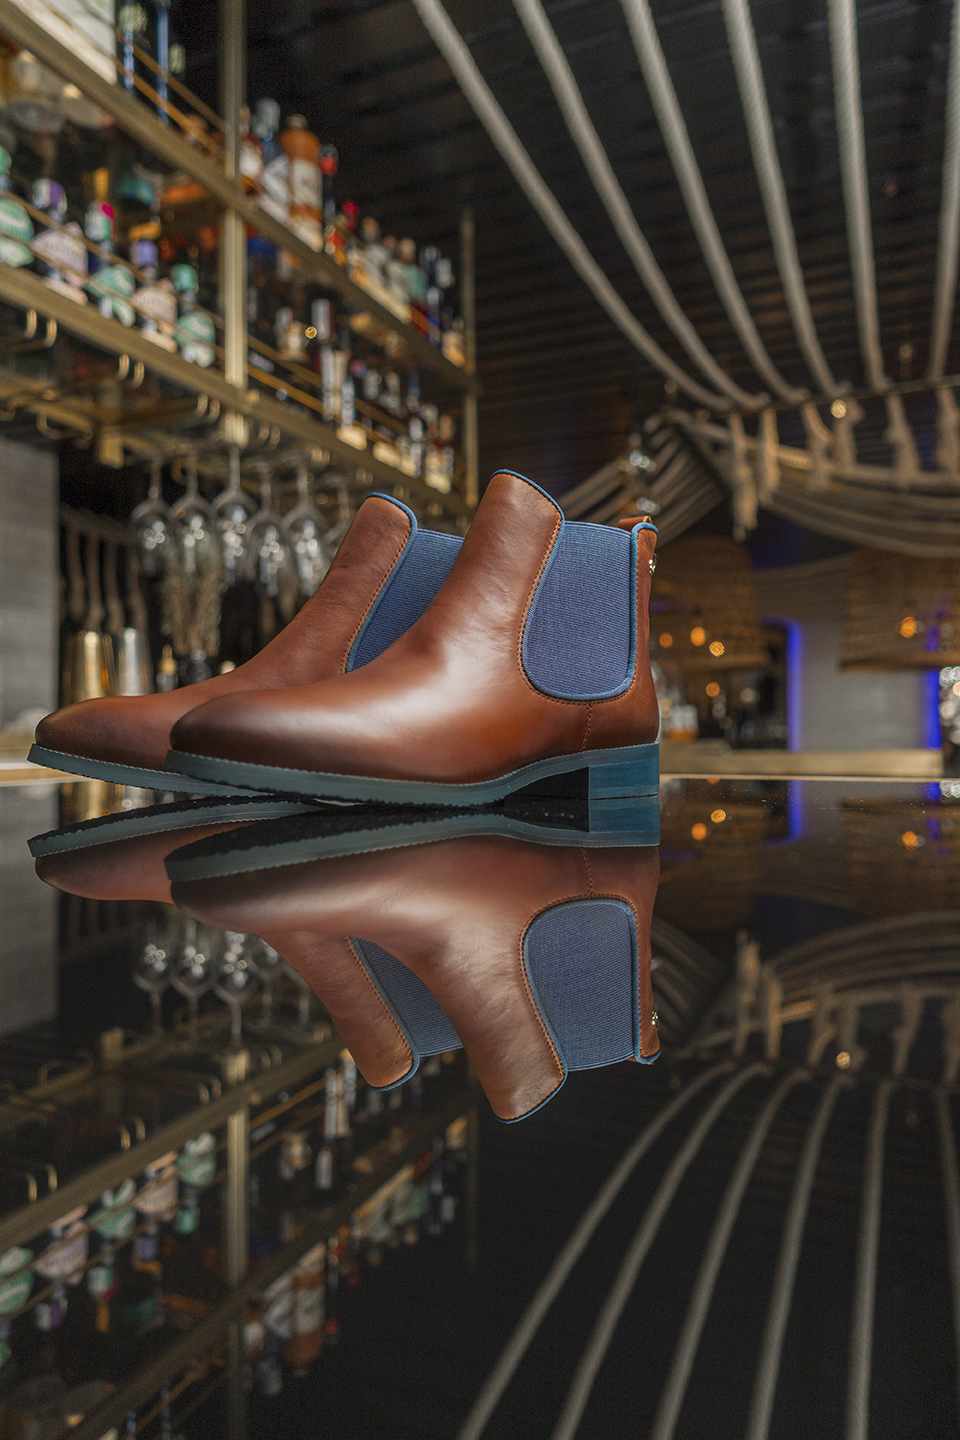 Image of a pair of brown ankle boots on a bar counter.